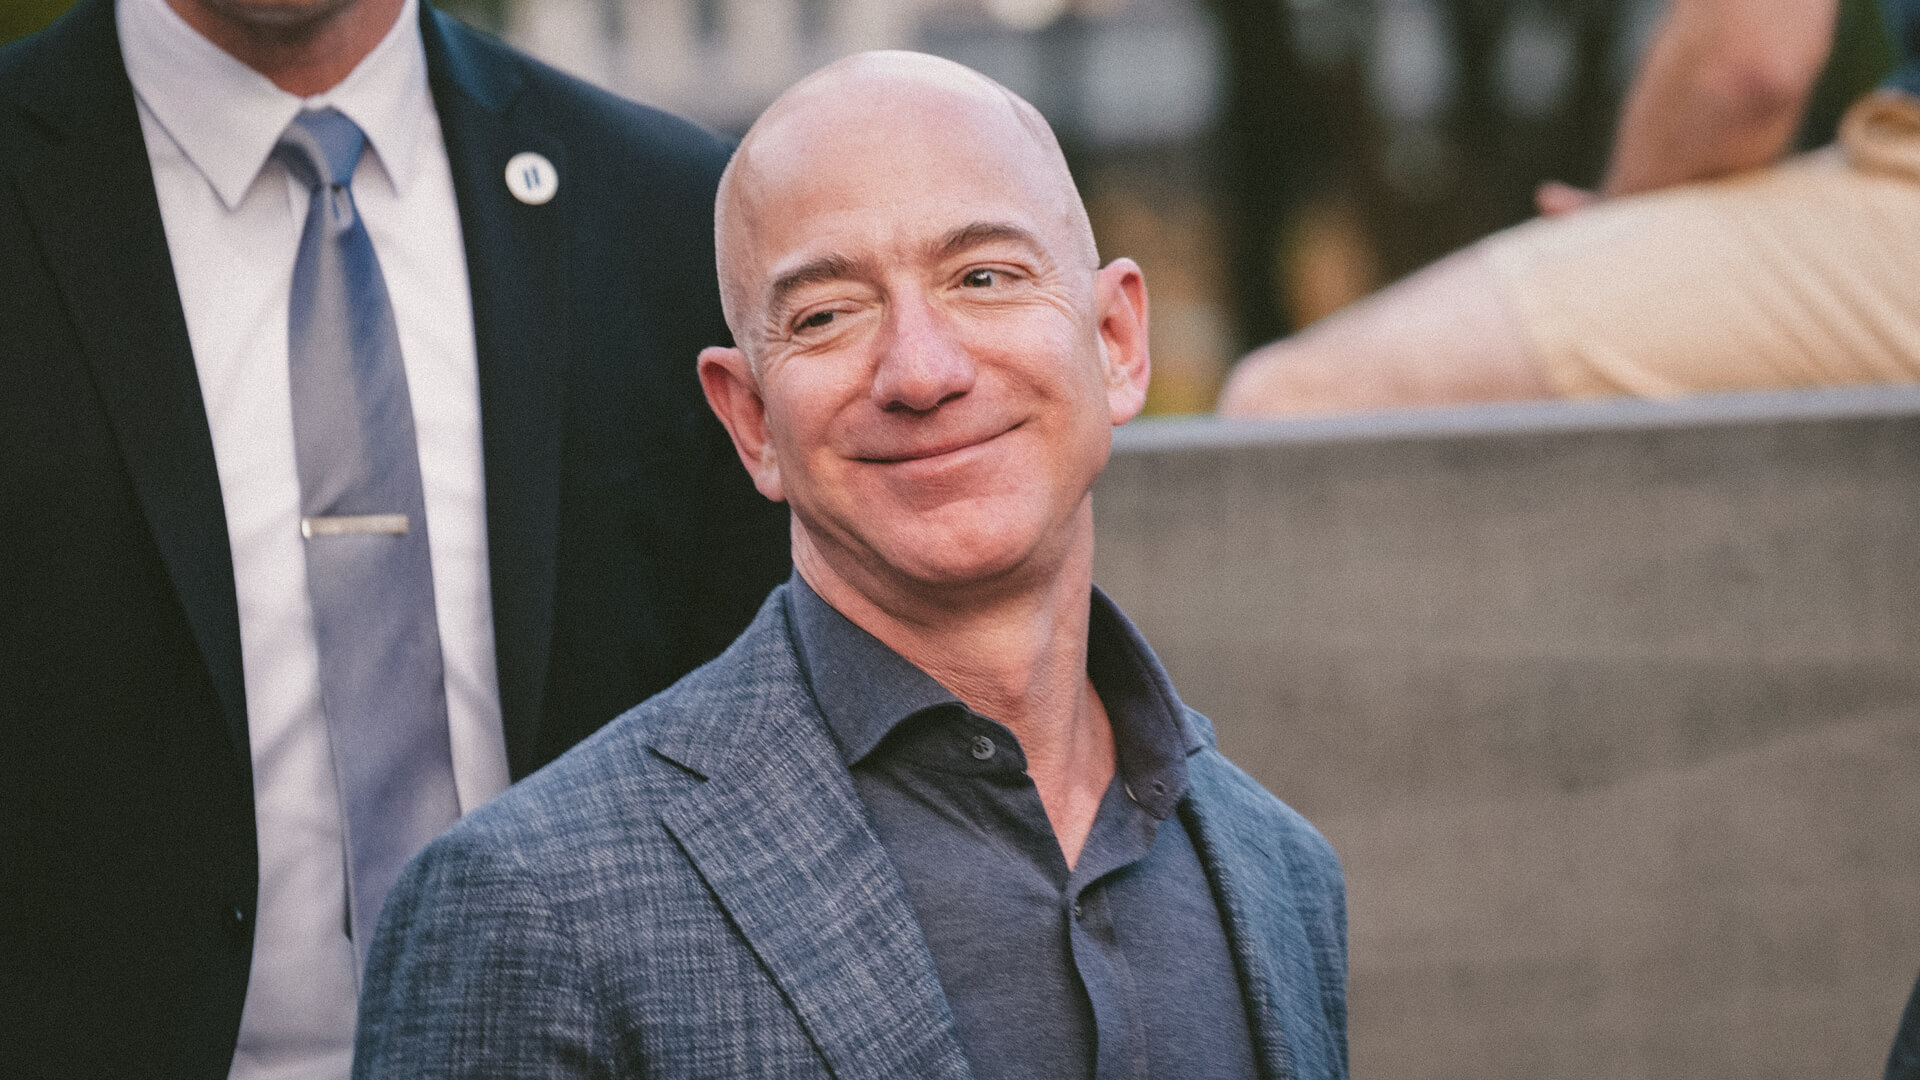 amazon, microsoft, jeff bezos, elon musk and other top entrepreneurs on what you’ll need to do to be one